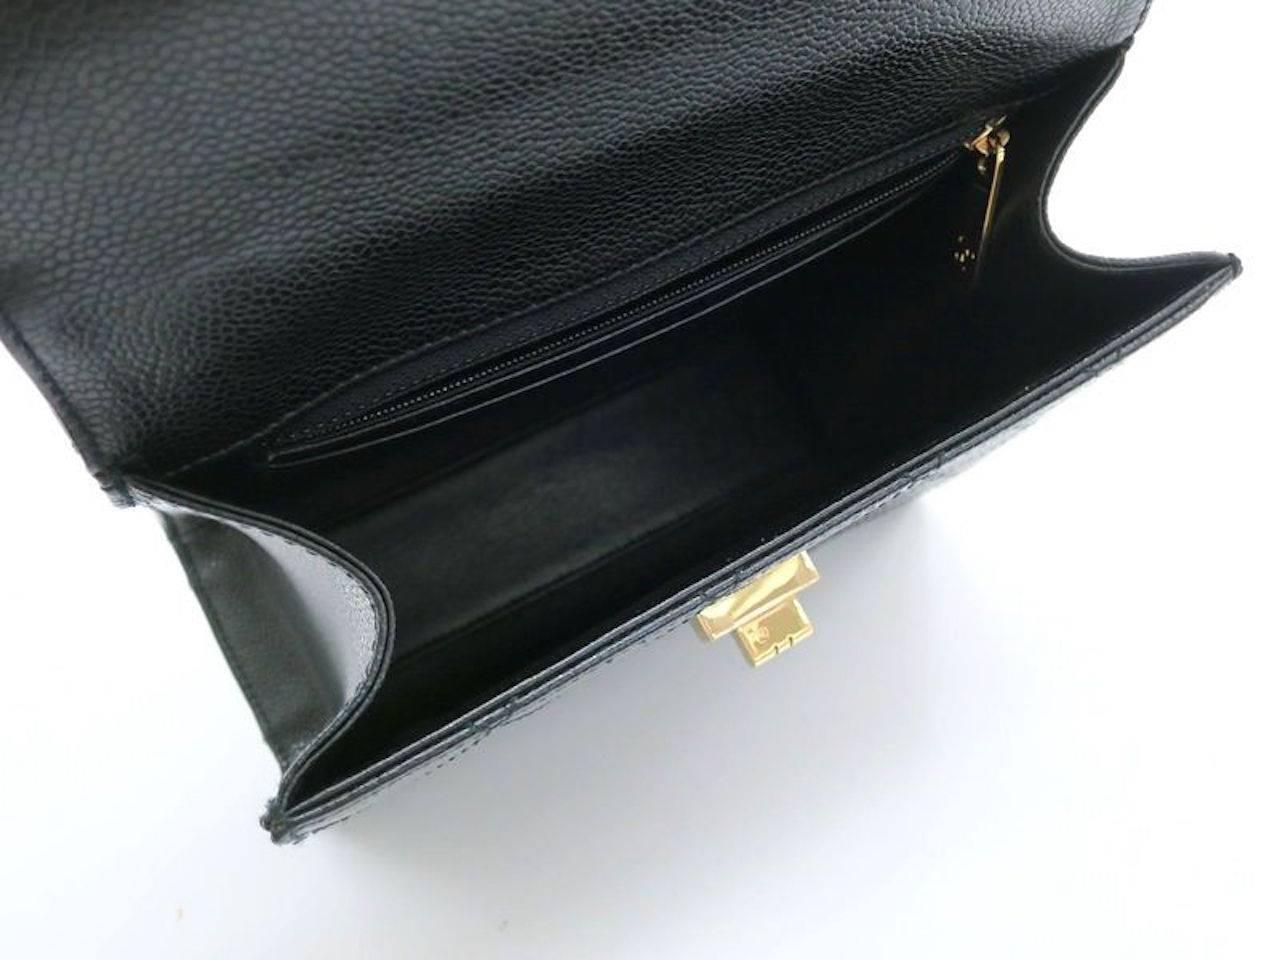 Chanel Black Caviar Leather Gold Kelly Style Box Top Handle Satchel Bag in Box 1